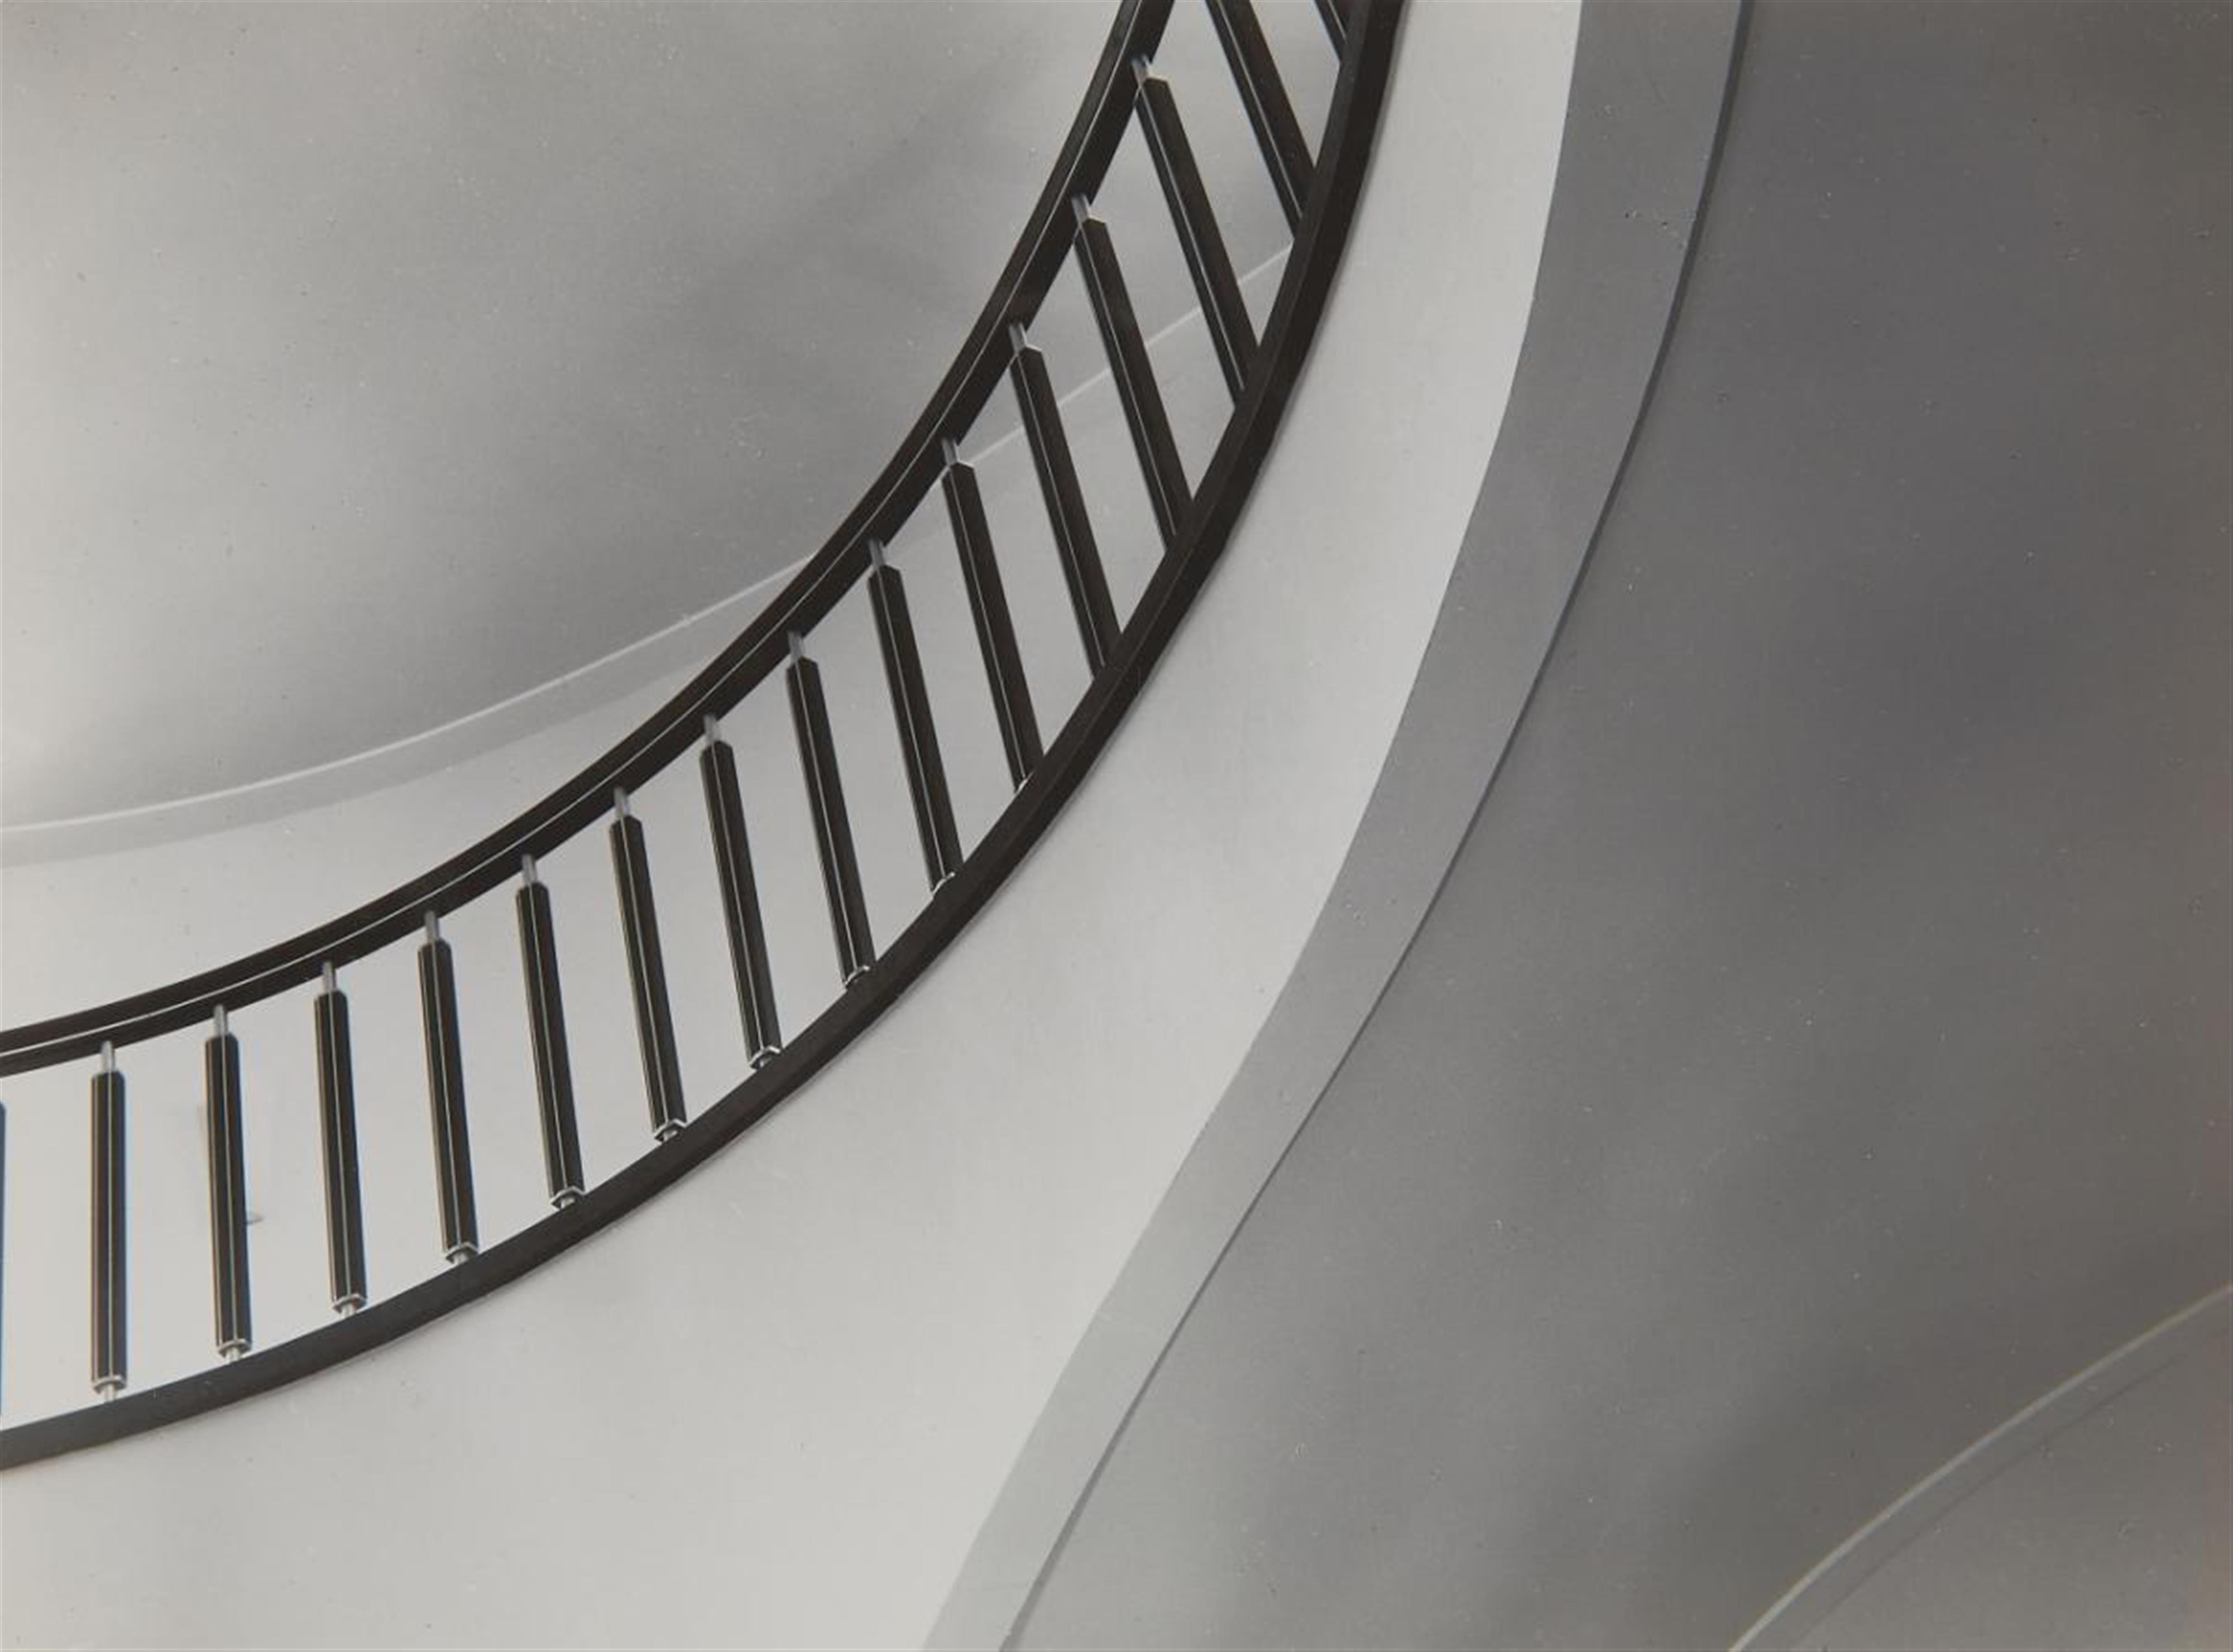 Max Baur - Untitled (Stairway of the Theological Academy Paderborn) - image-1